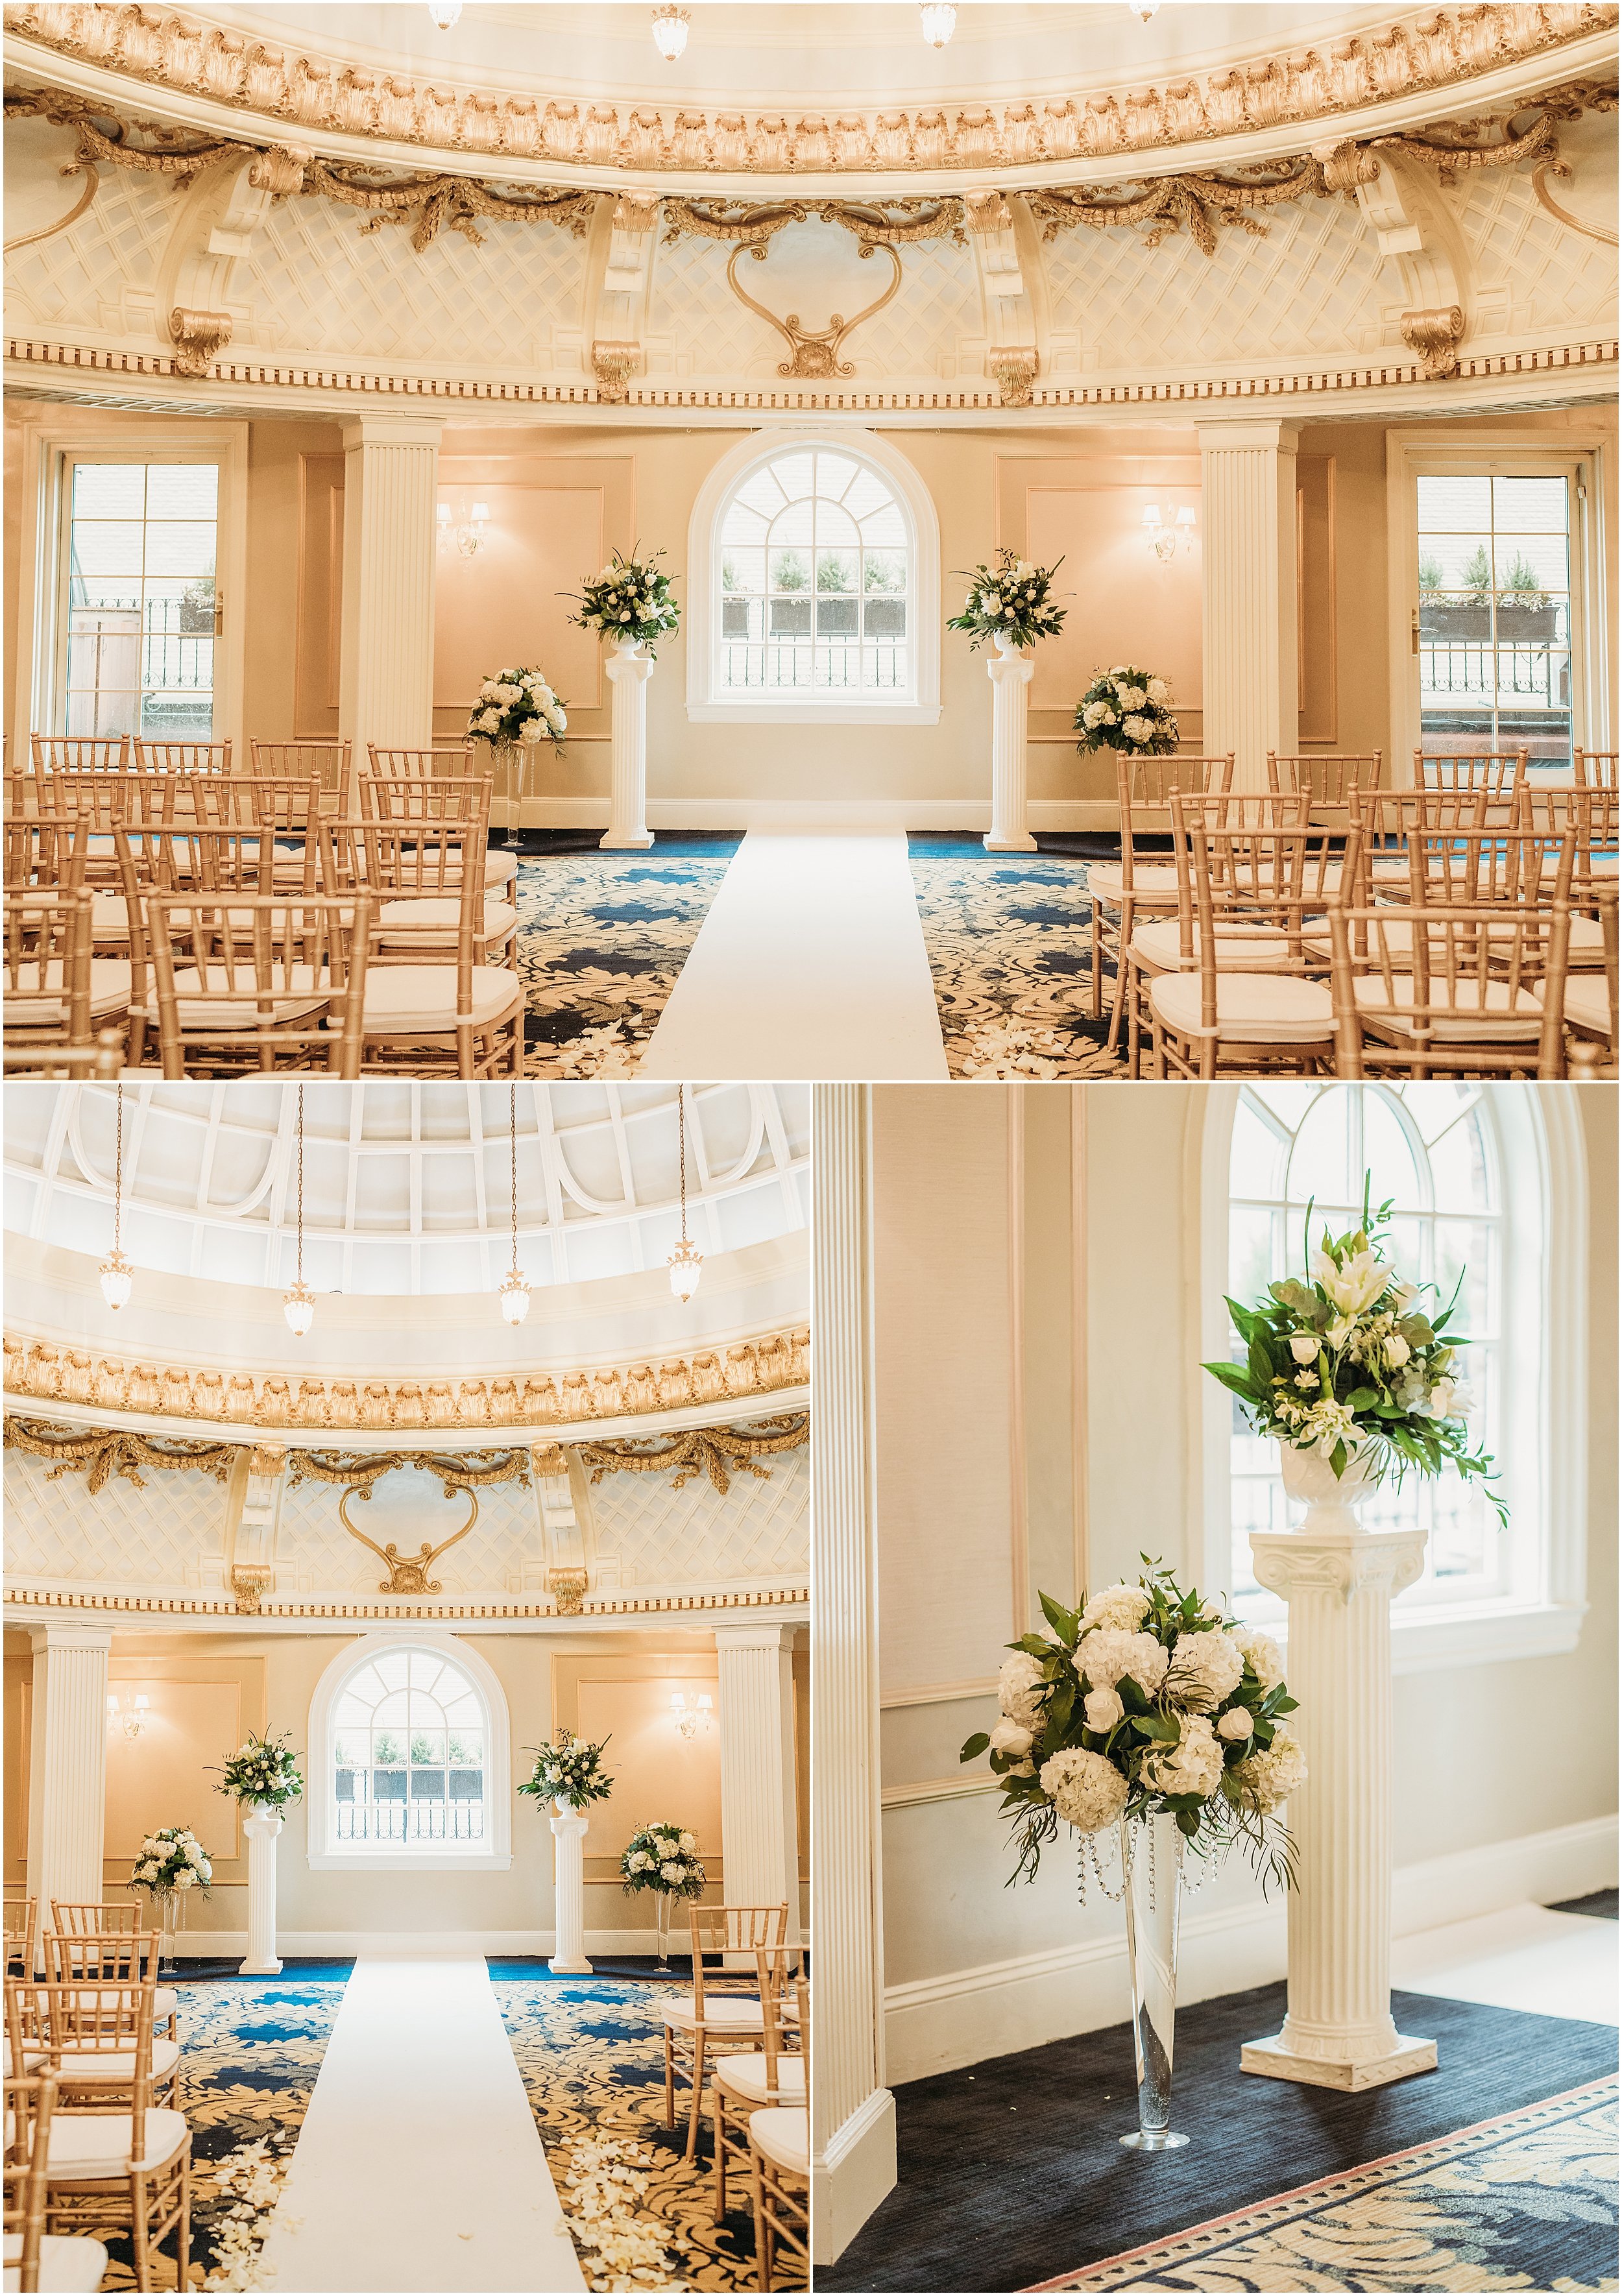  Bride and groom had their ceremony at the Dome Room in Boston Lenox Hotel.  